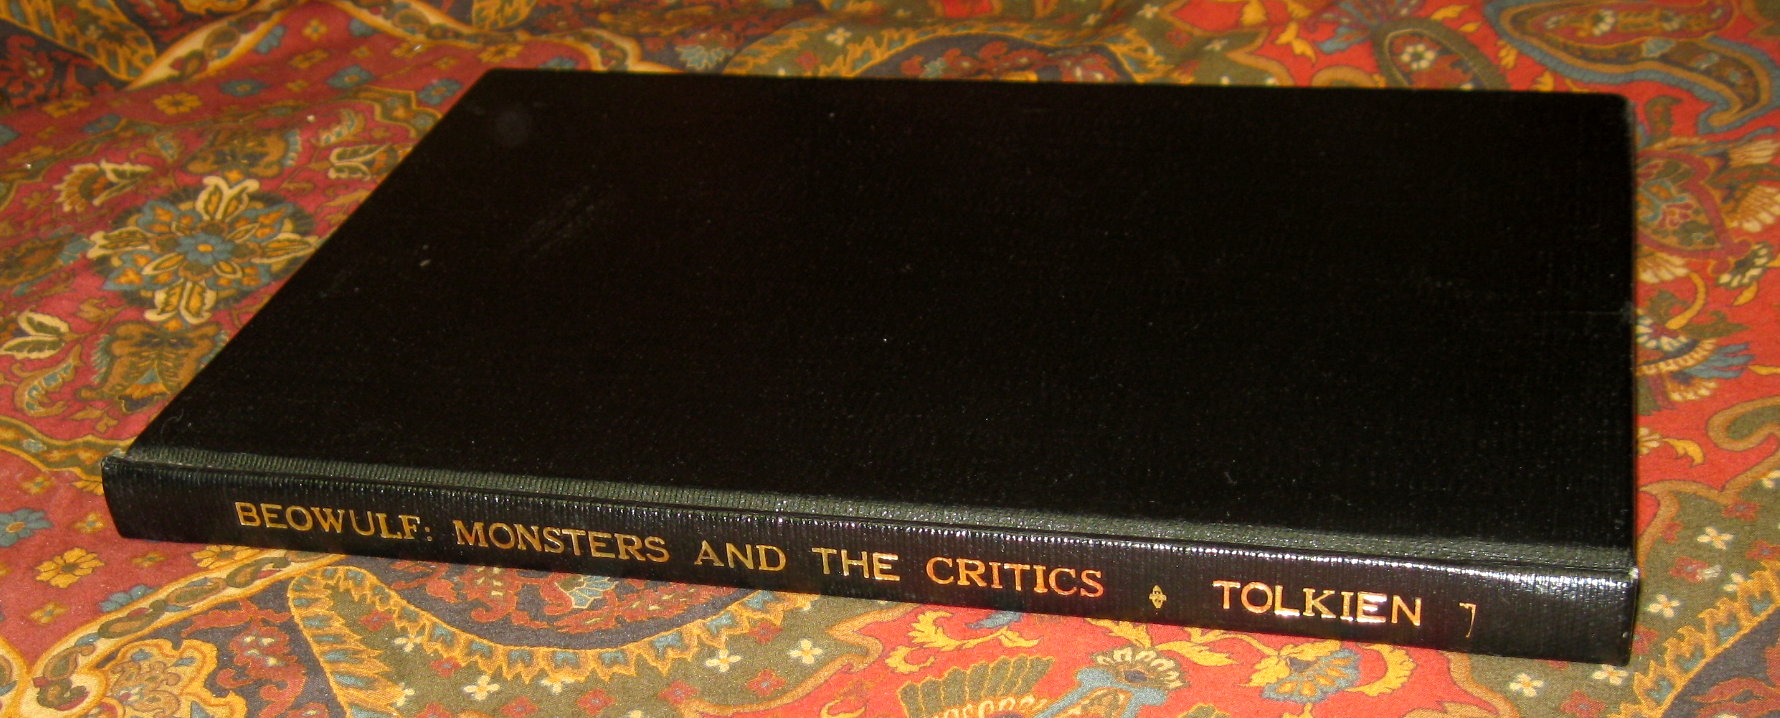 Beowulf: Monsters and the Critics, Limited Edition 1 of 100 